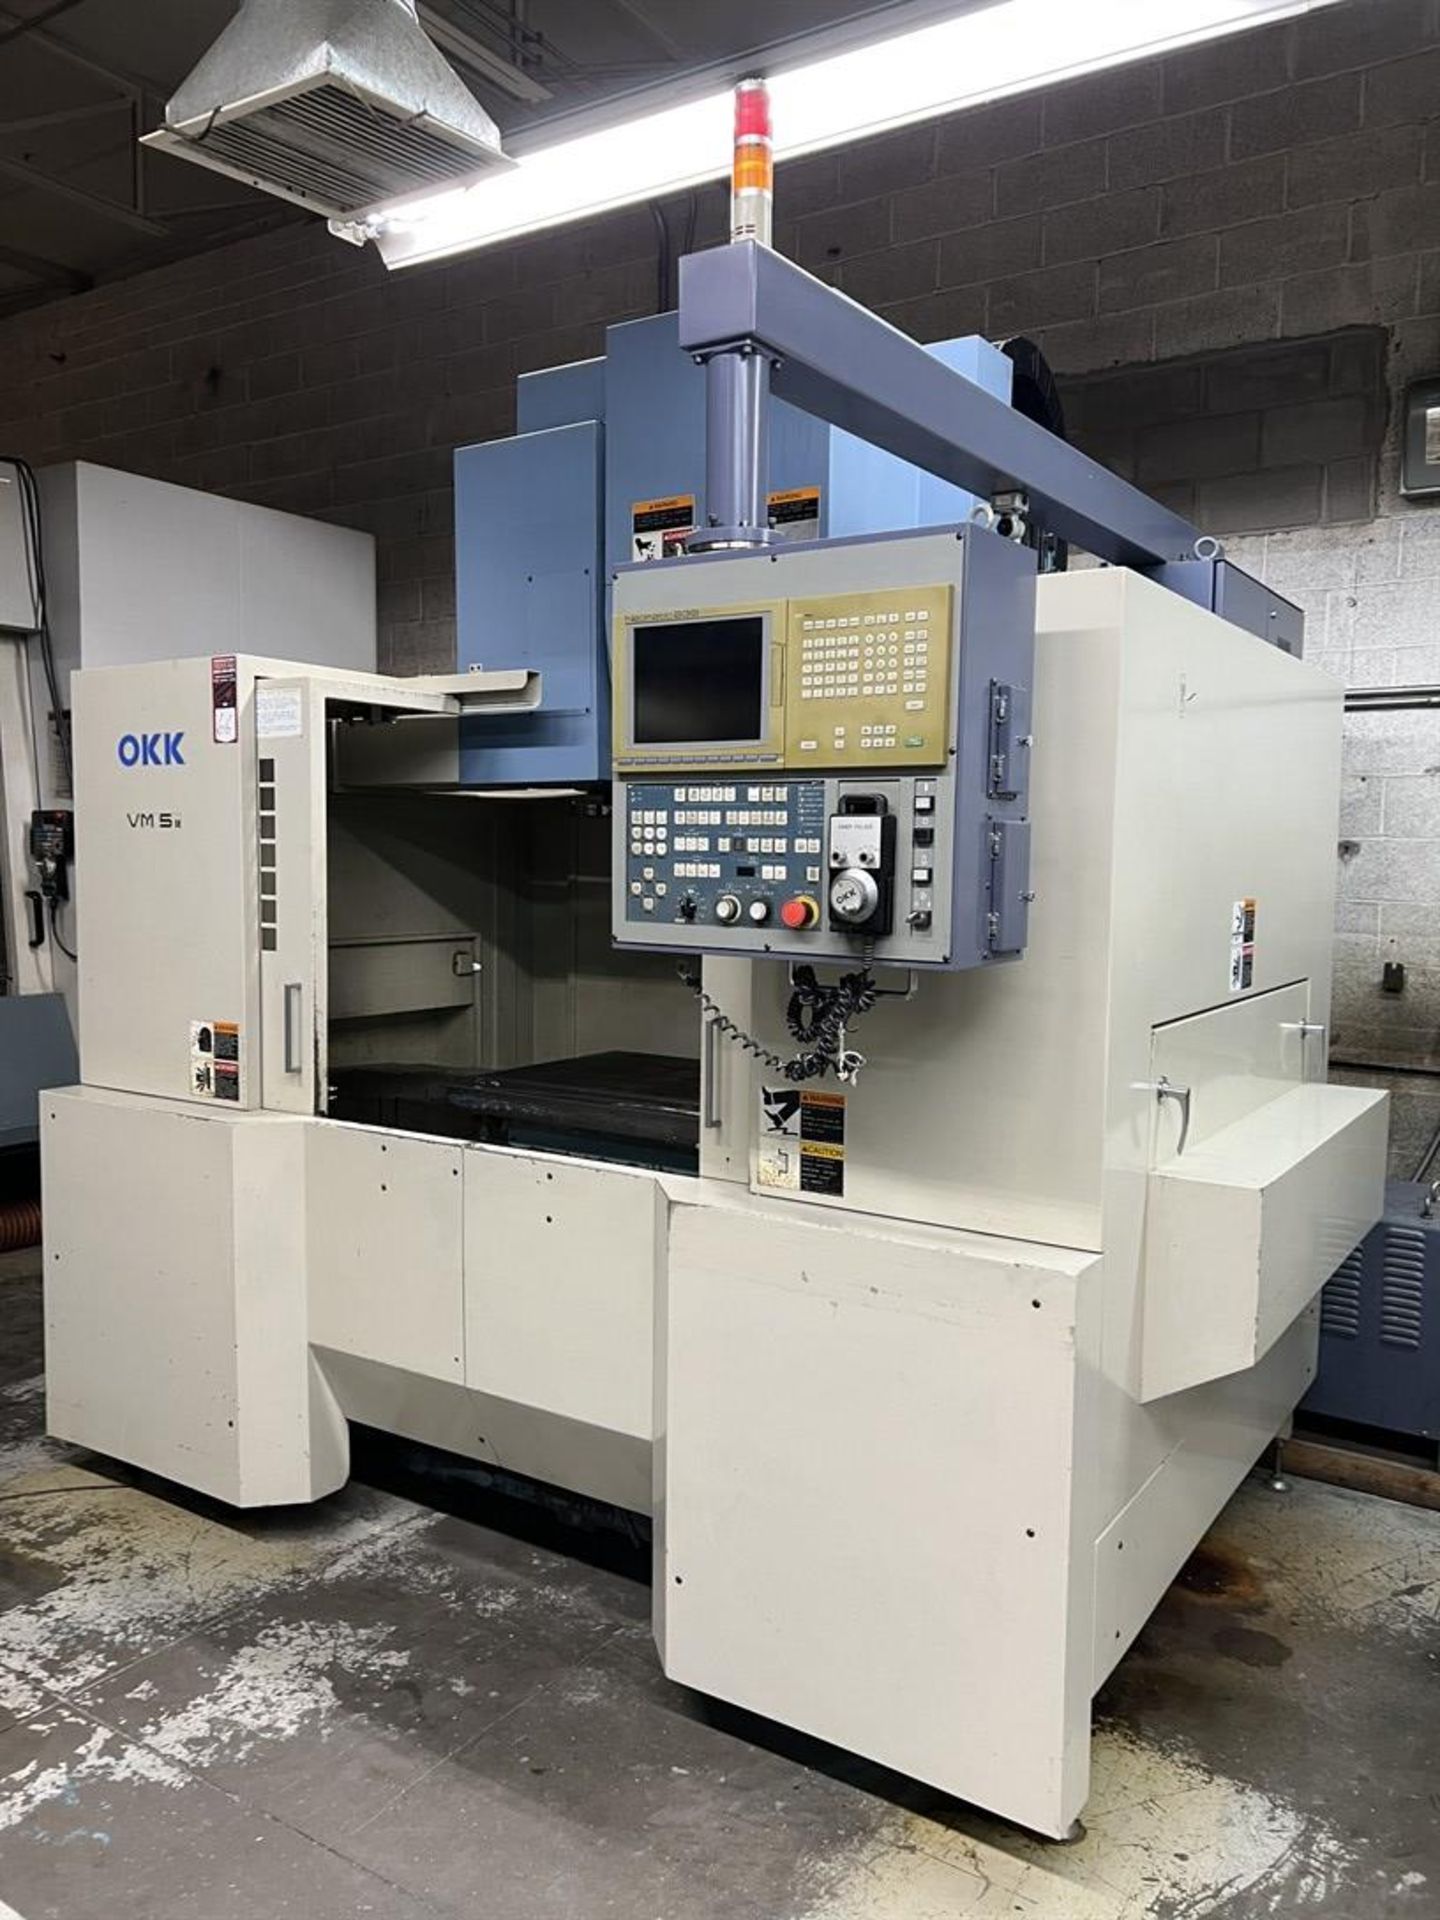 OKK VM5II Vertical Machining Center, s/n 452, Neomatic 635 Control, 22” x 41” Table, CT40 Spindle